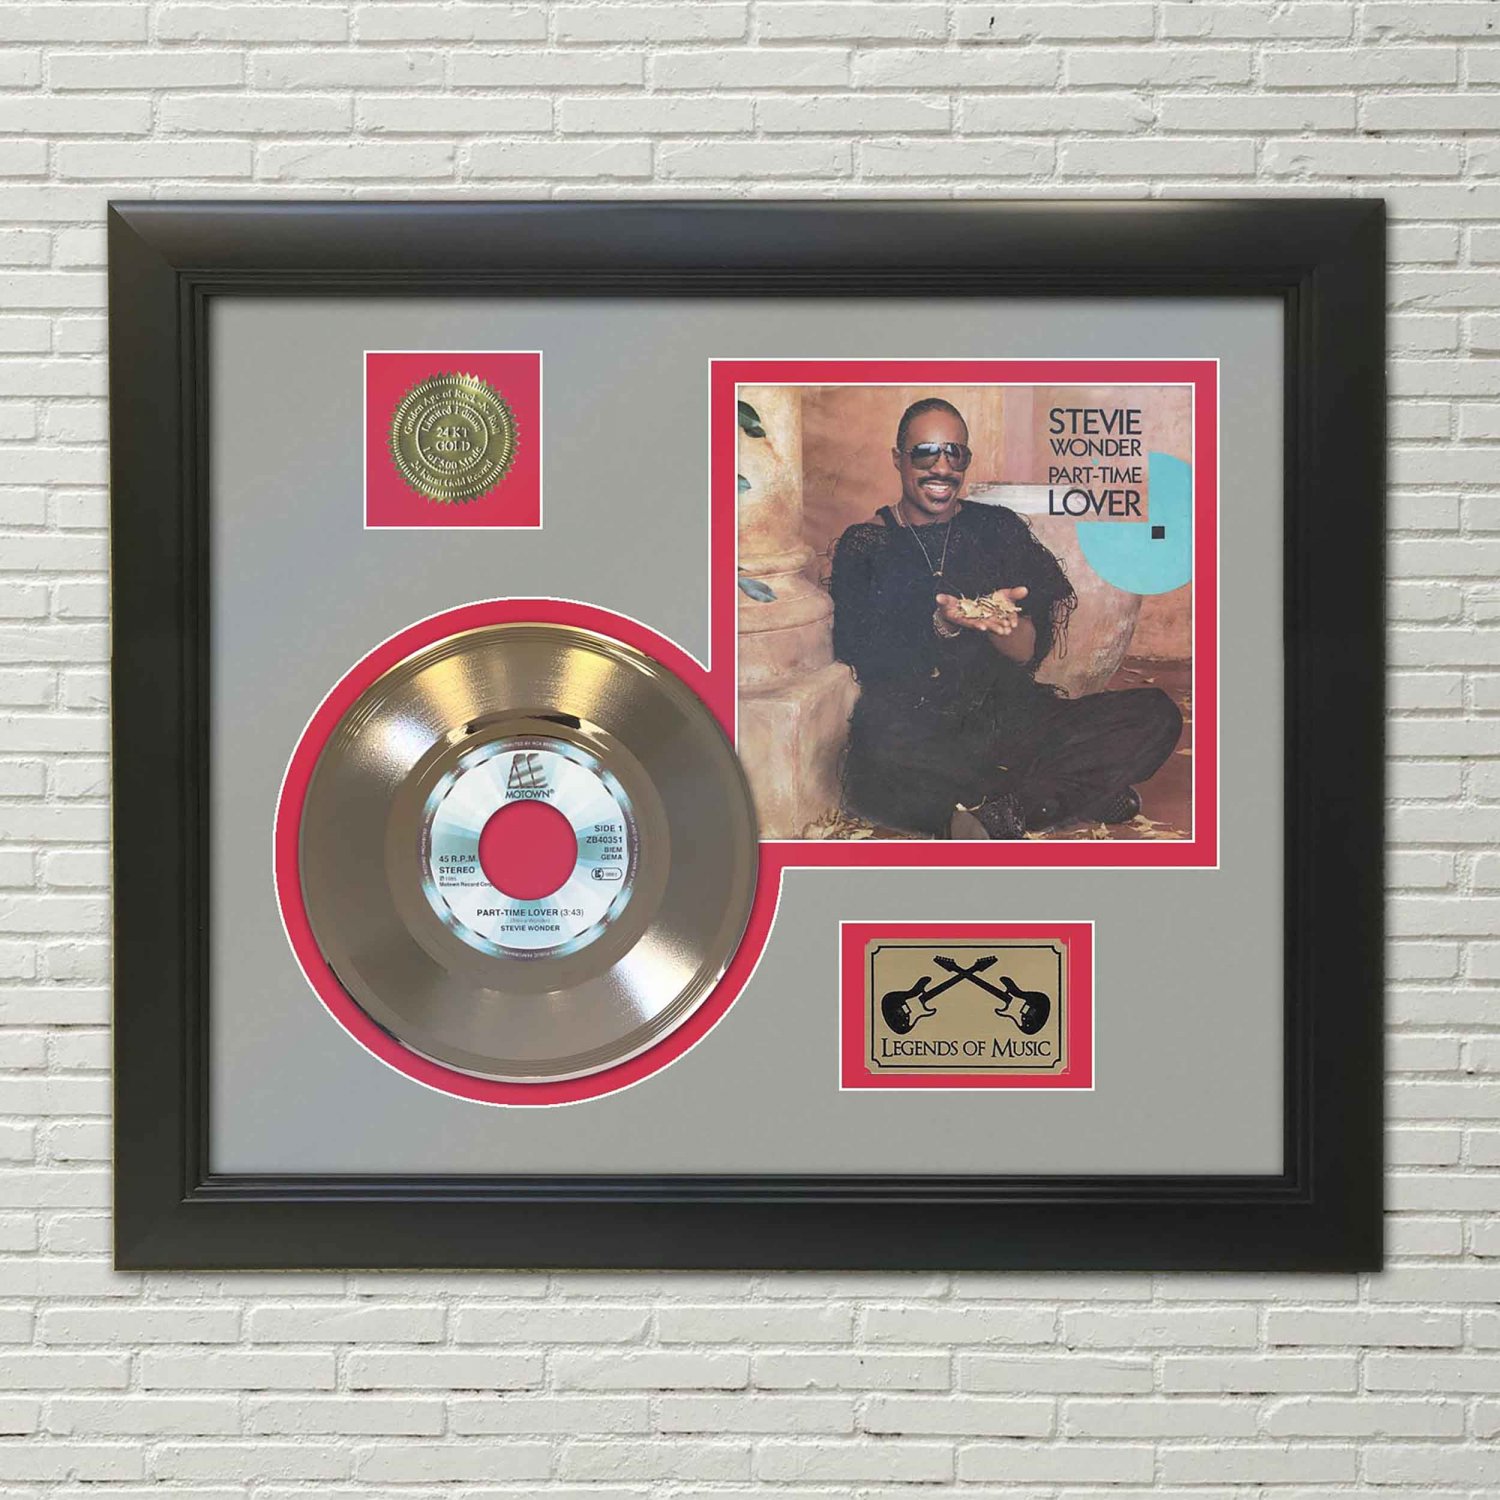 STEVIE WONDER "Part-Time Lover"  Framed Picture Sleeve Gold 45 Record Display